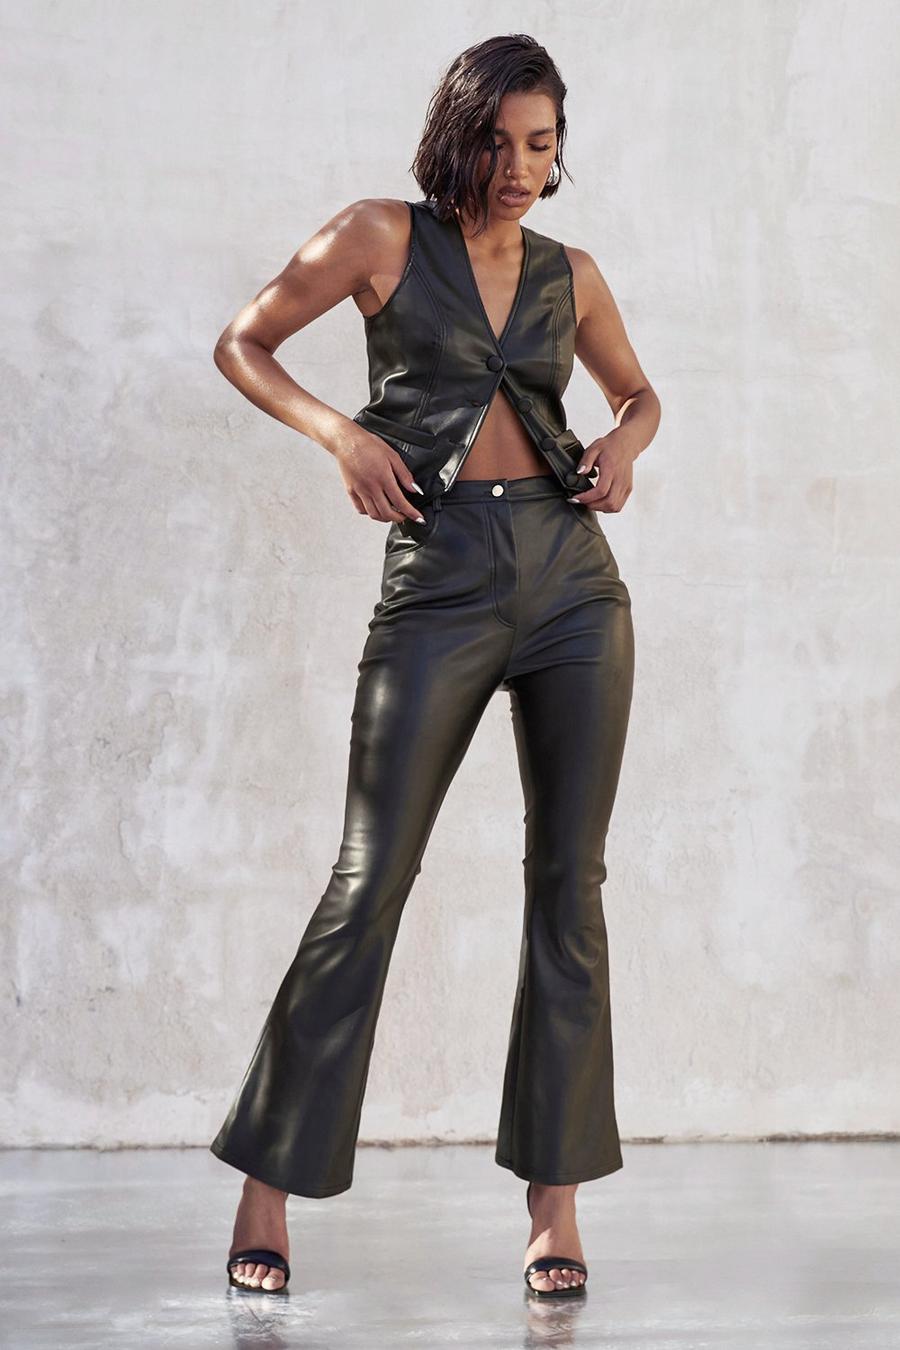 Black Faux Leather Flared Pants